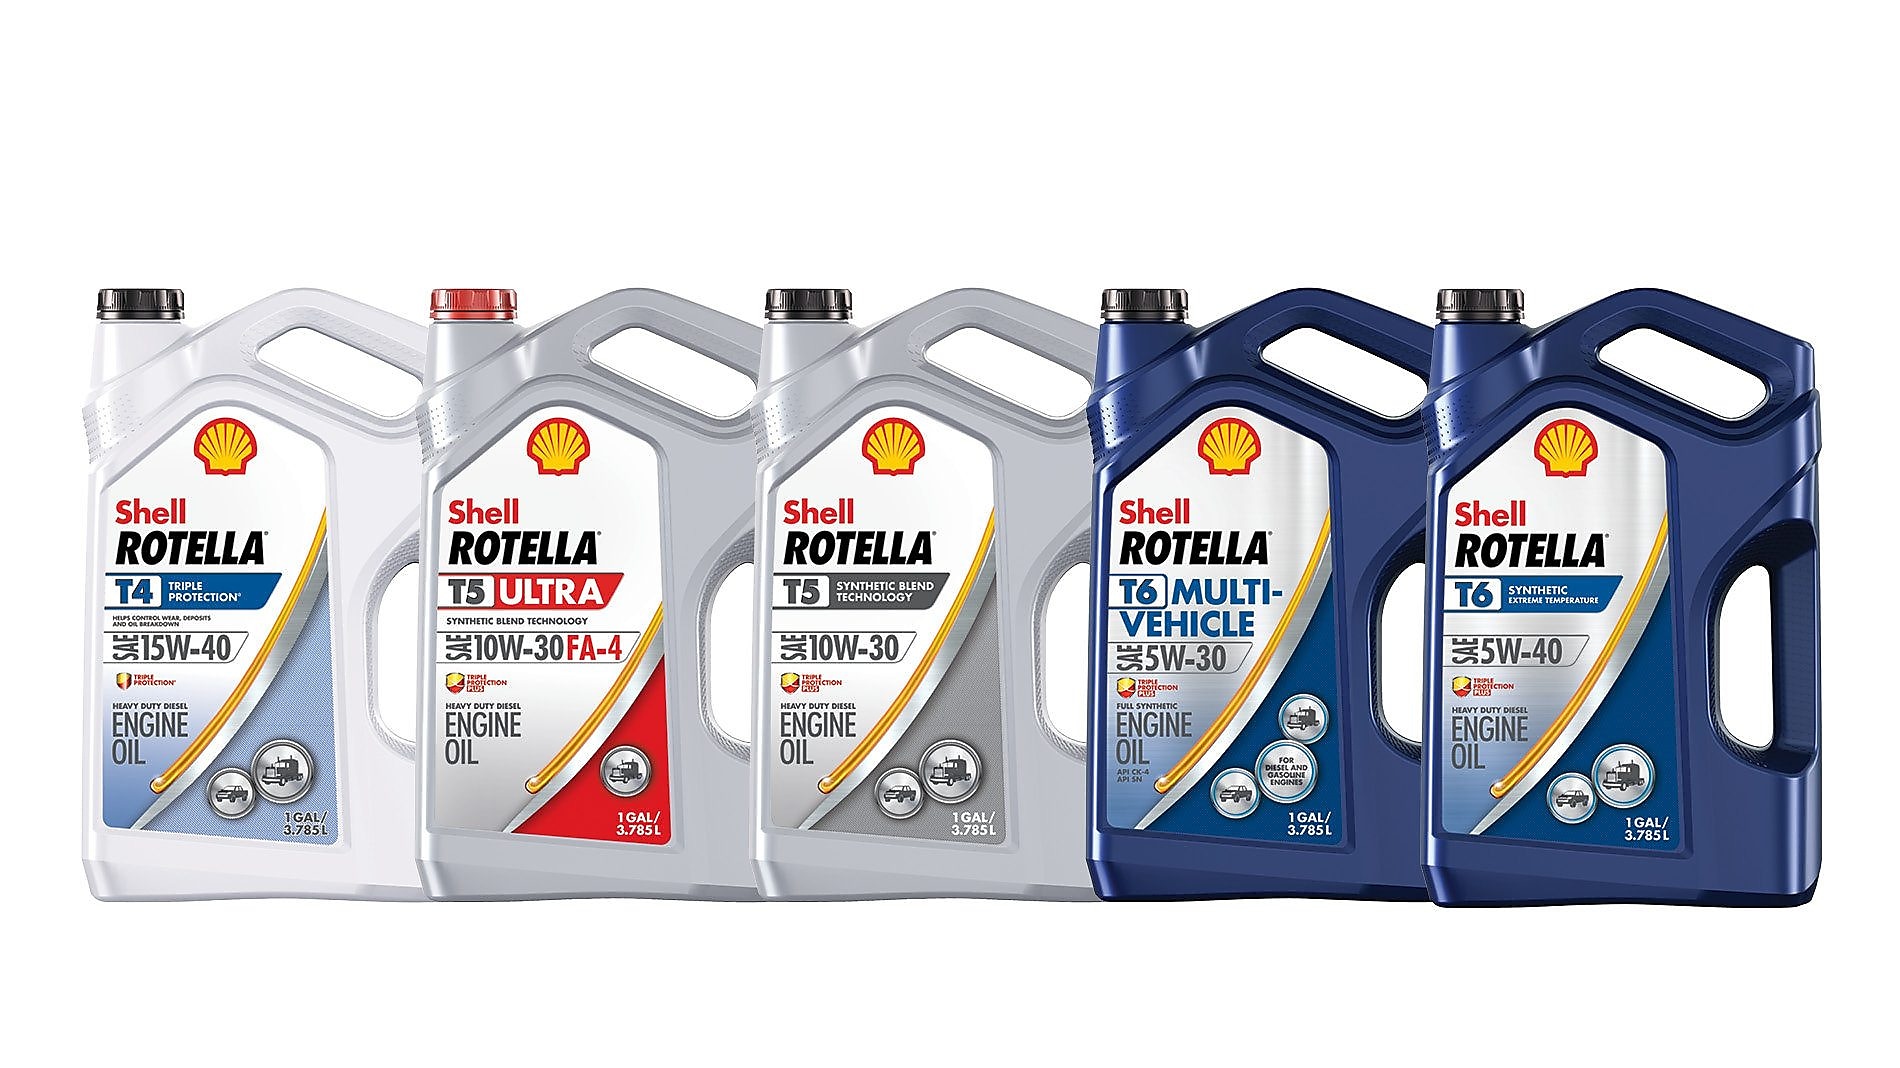 shell-rotella-products-heavy-duty-diesel-engine-oil-shell-rotella